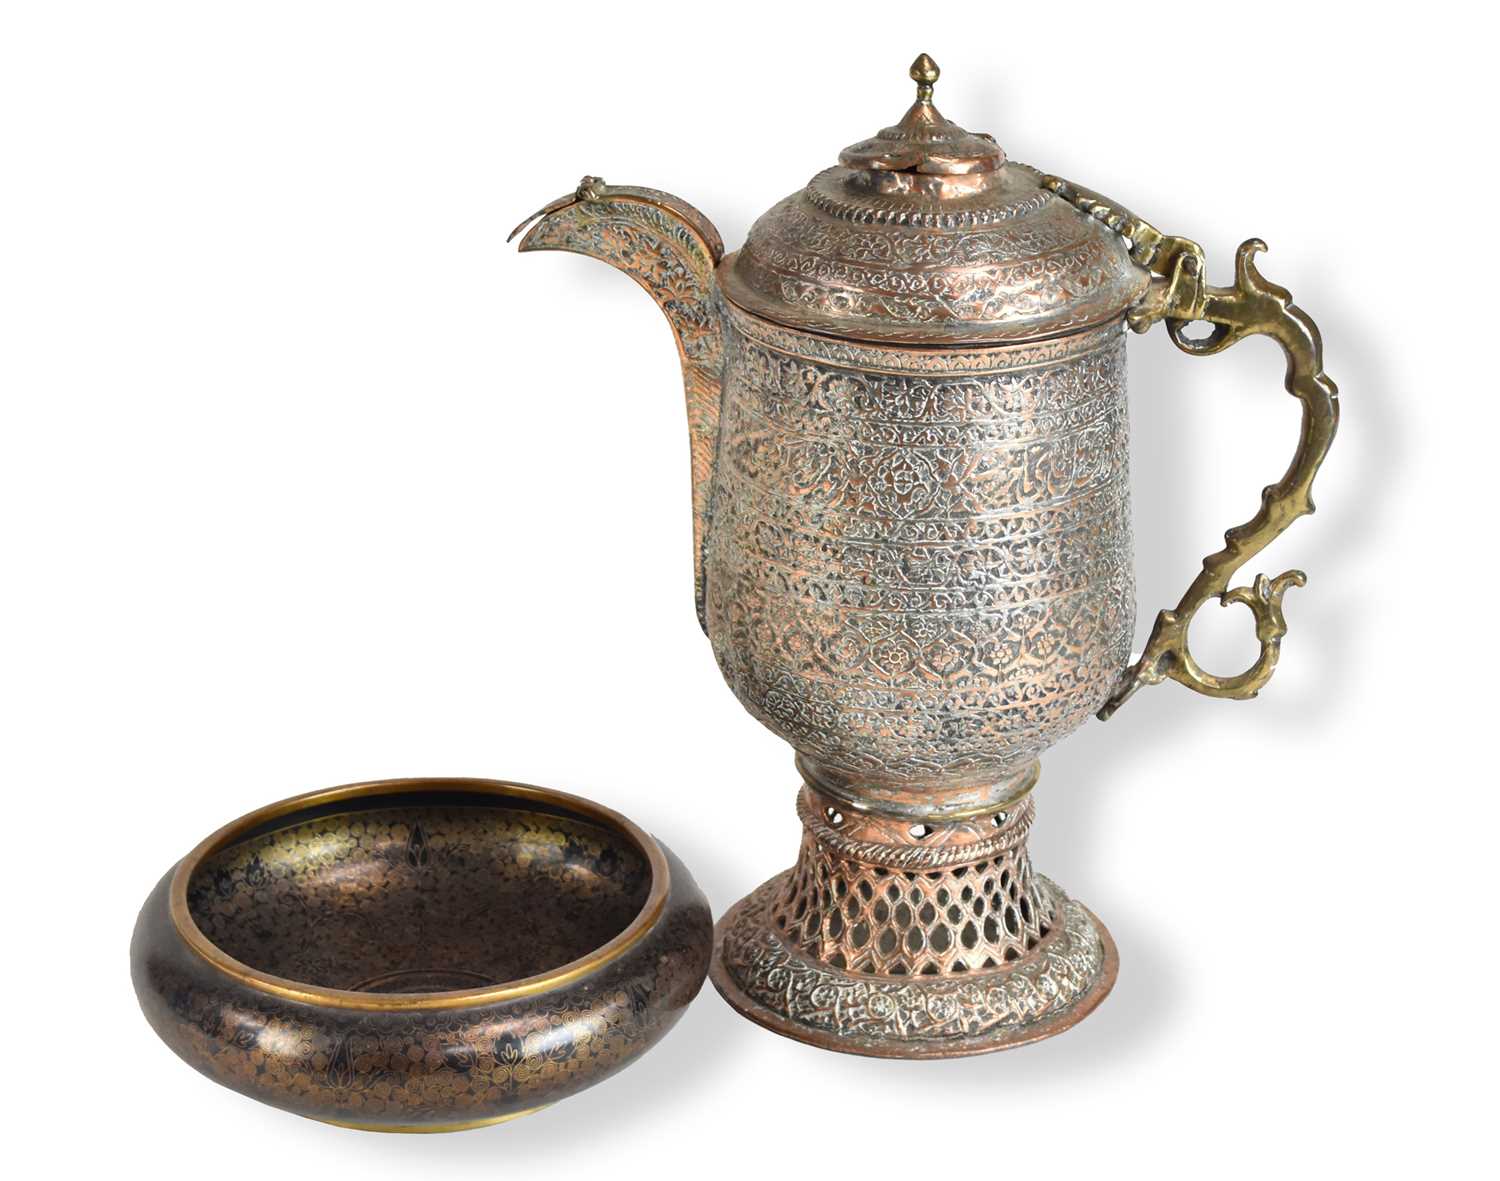 A Near Eastern copper ewer and a Chinese cloisonne censer